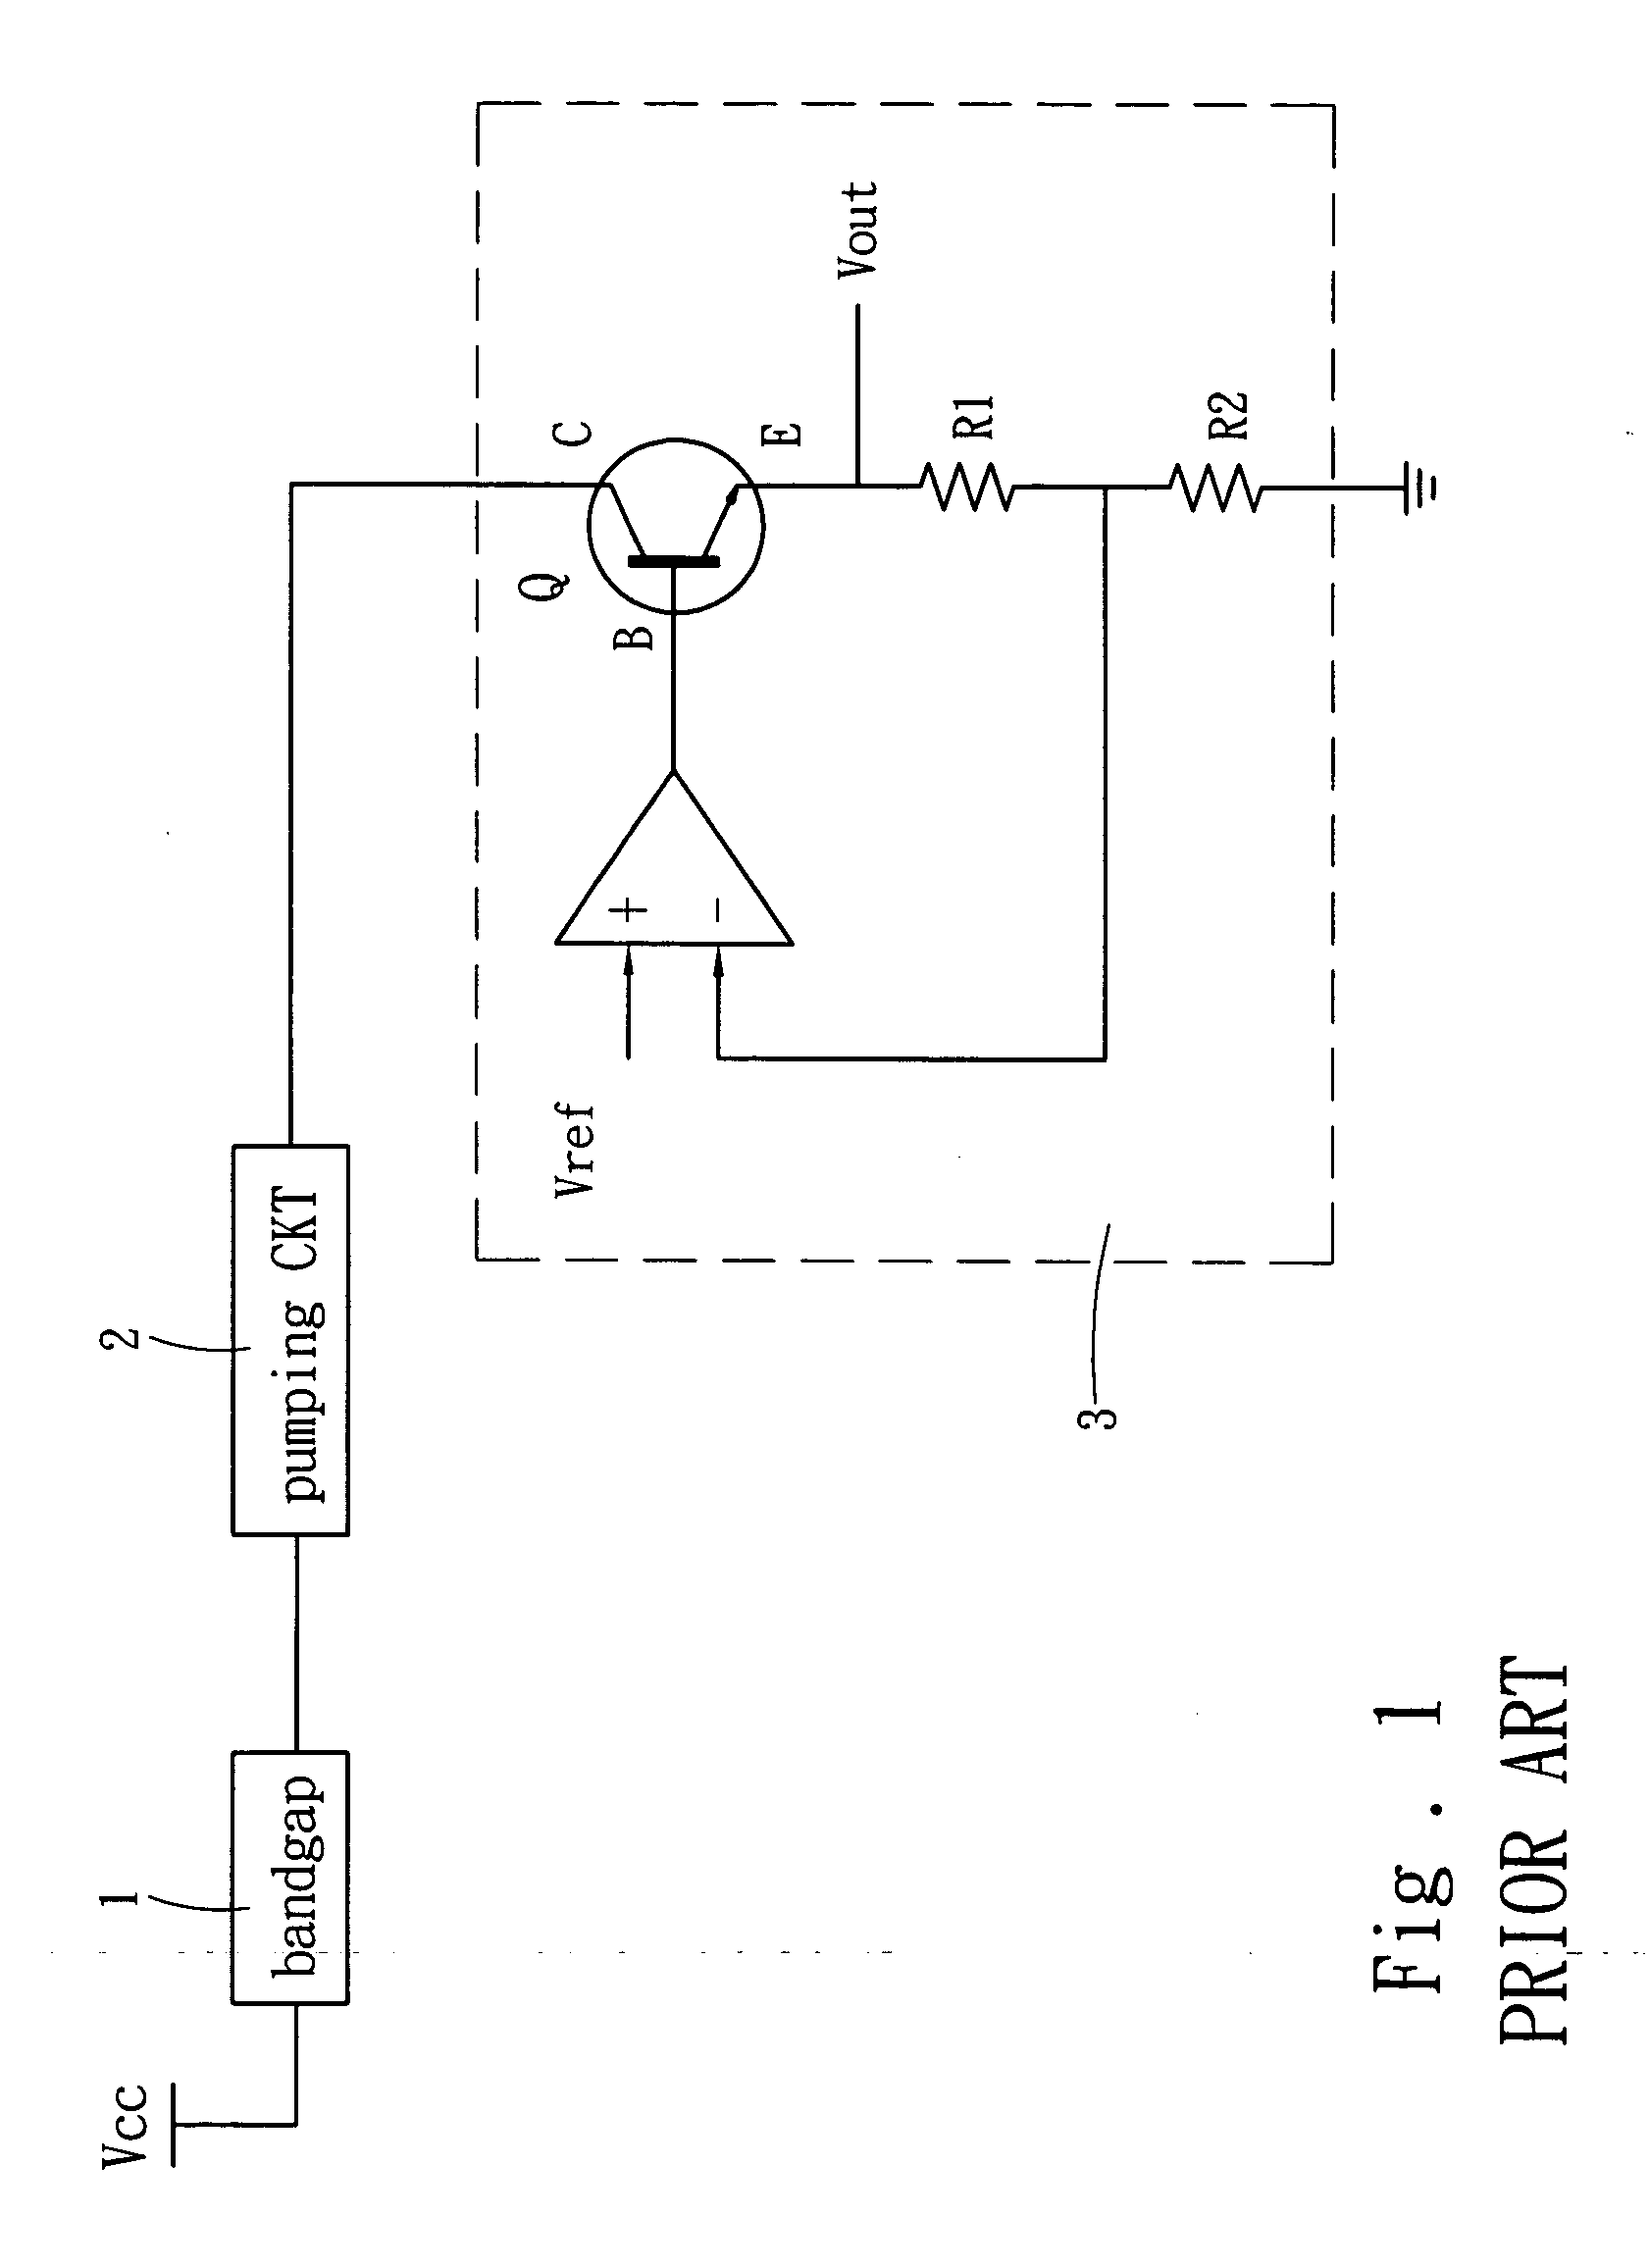 Circuit of voltage multiplier with programmable output